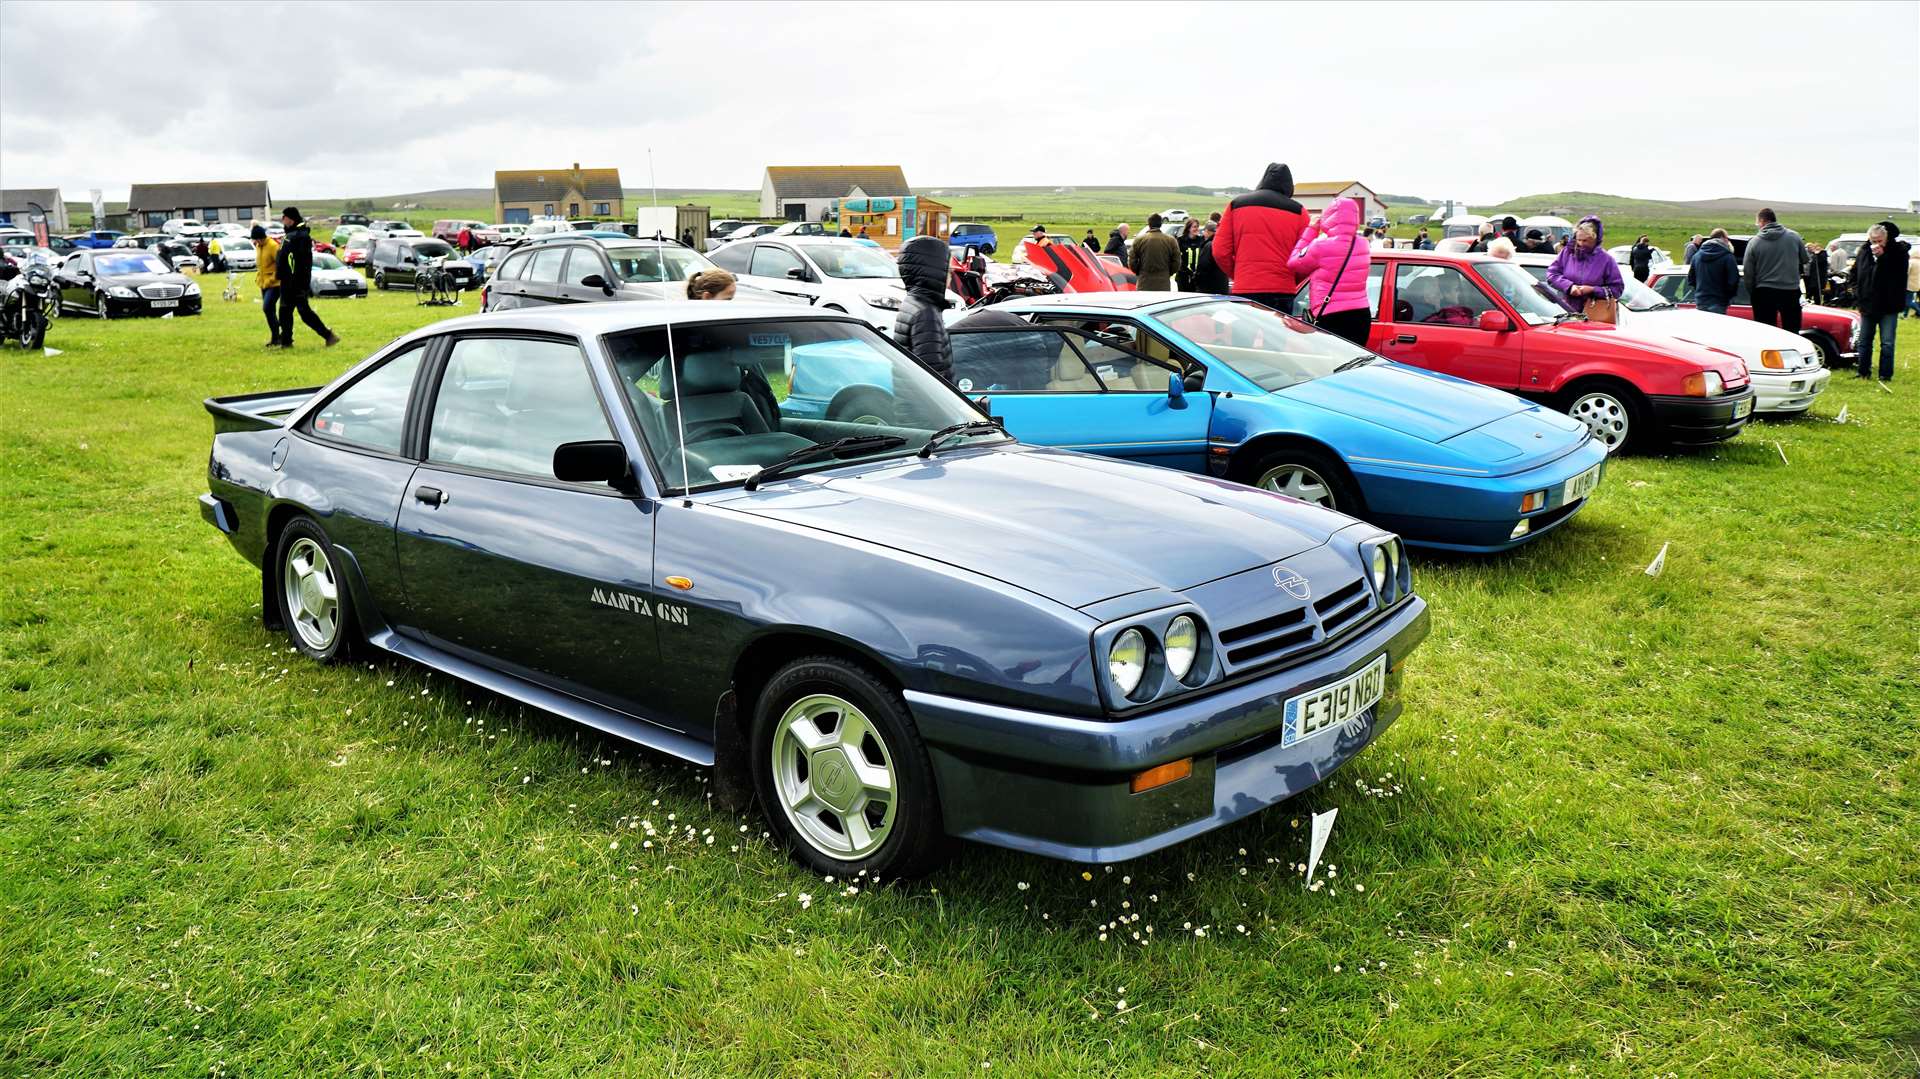 John King from Halkirk brought this 1988 Opel Manta GSI Coupe which won second place in its class. Picture: DGS